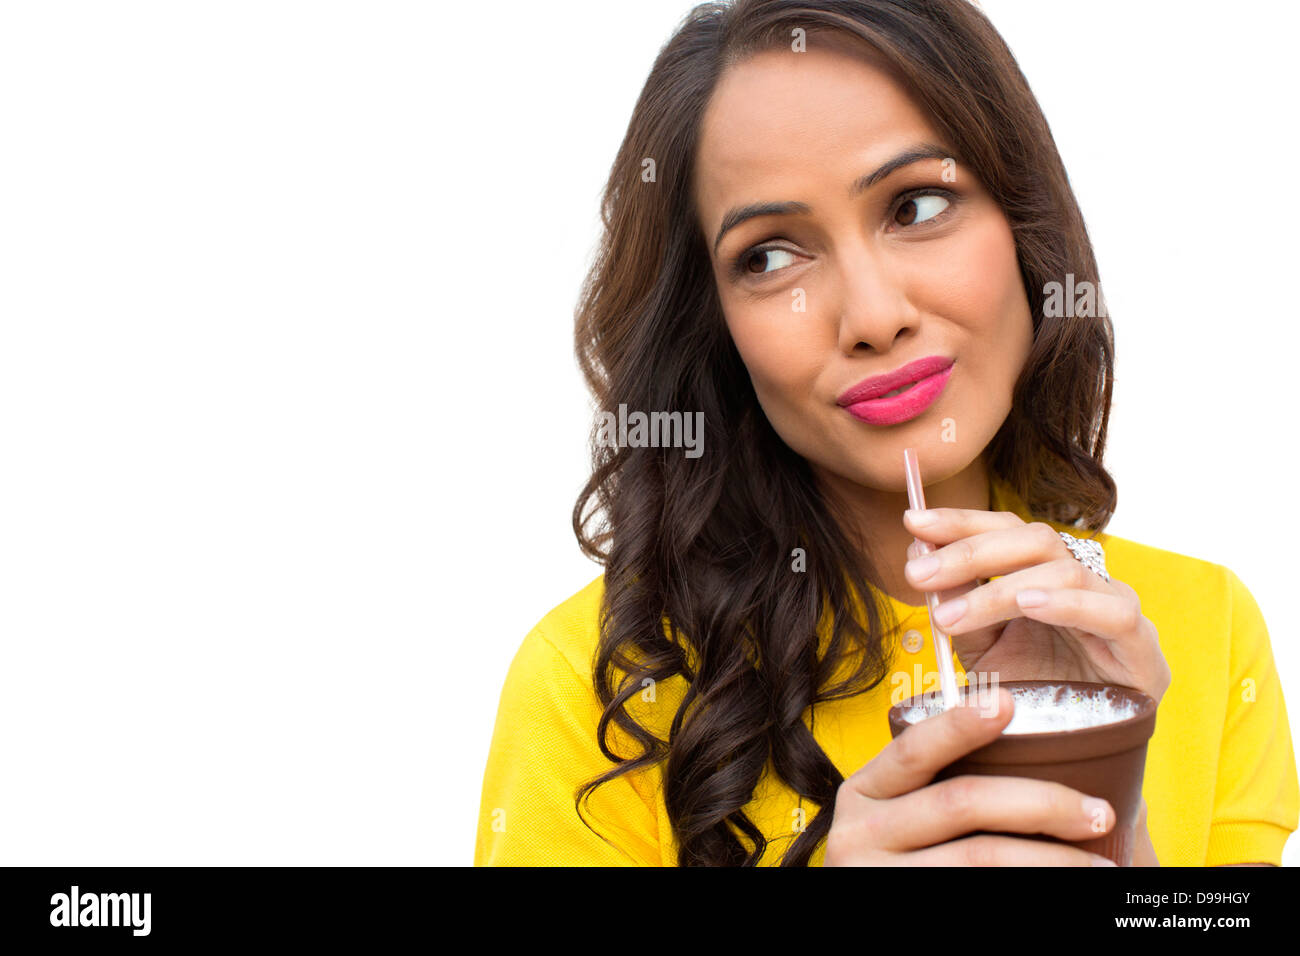 Close-up of a woman drinking milk Stock Photo